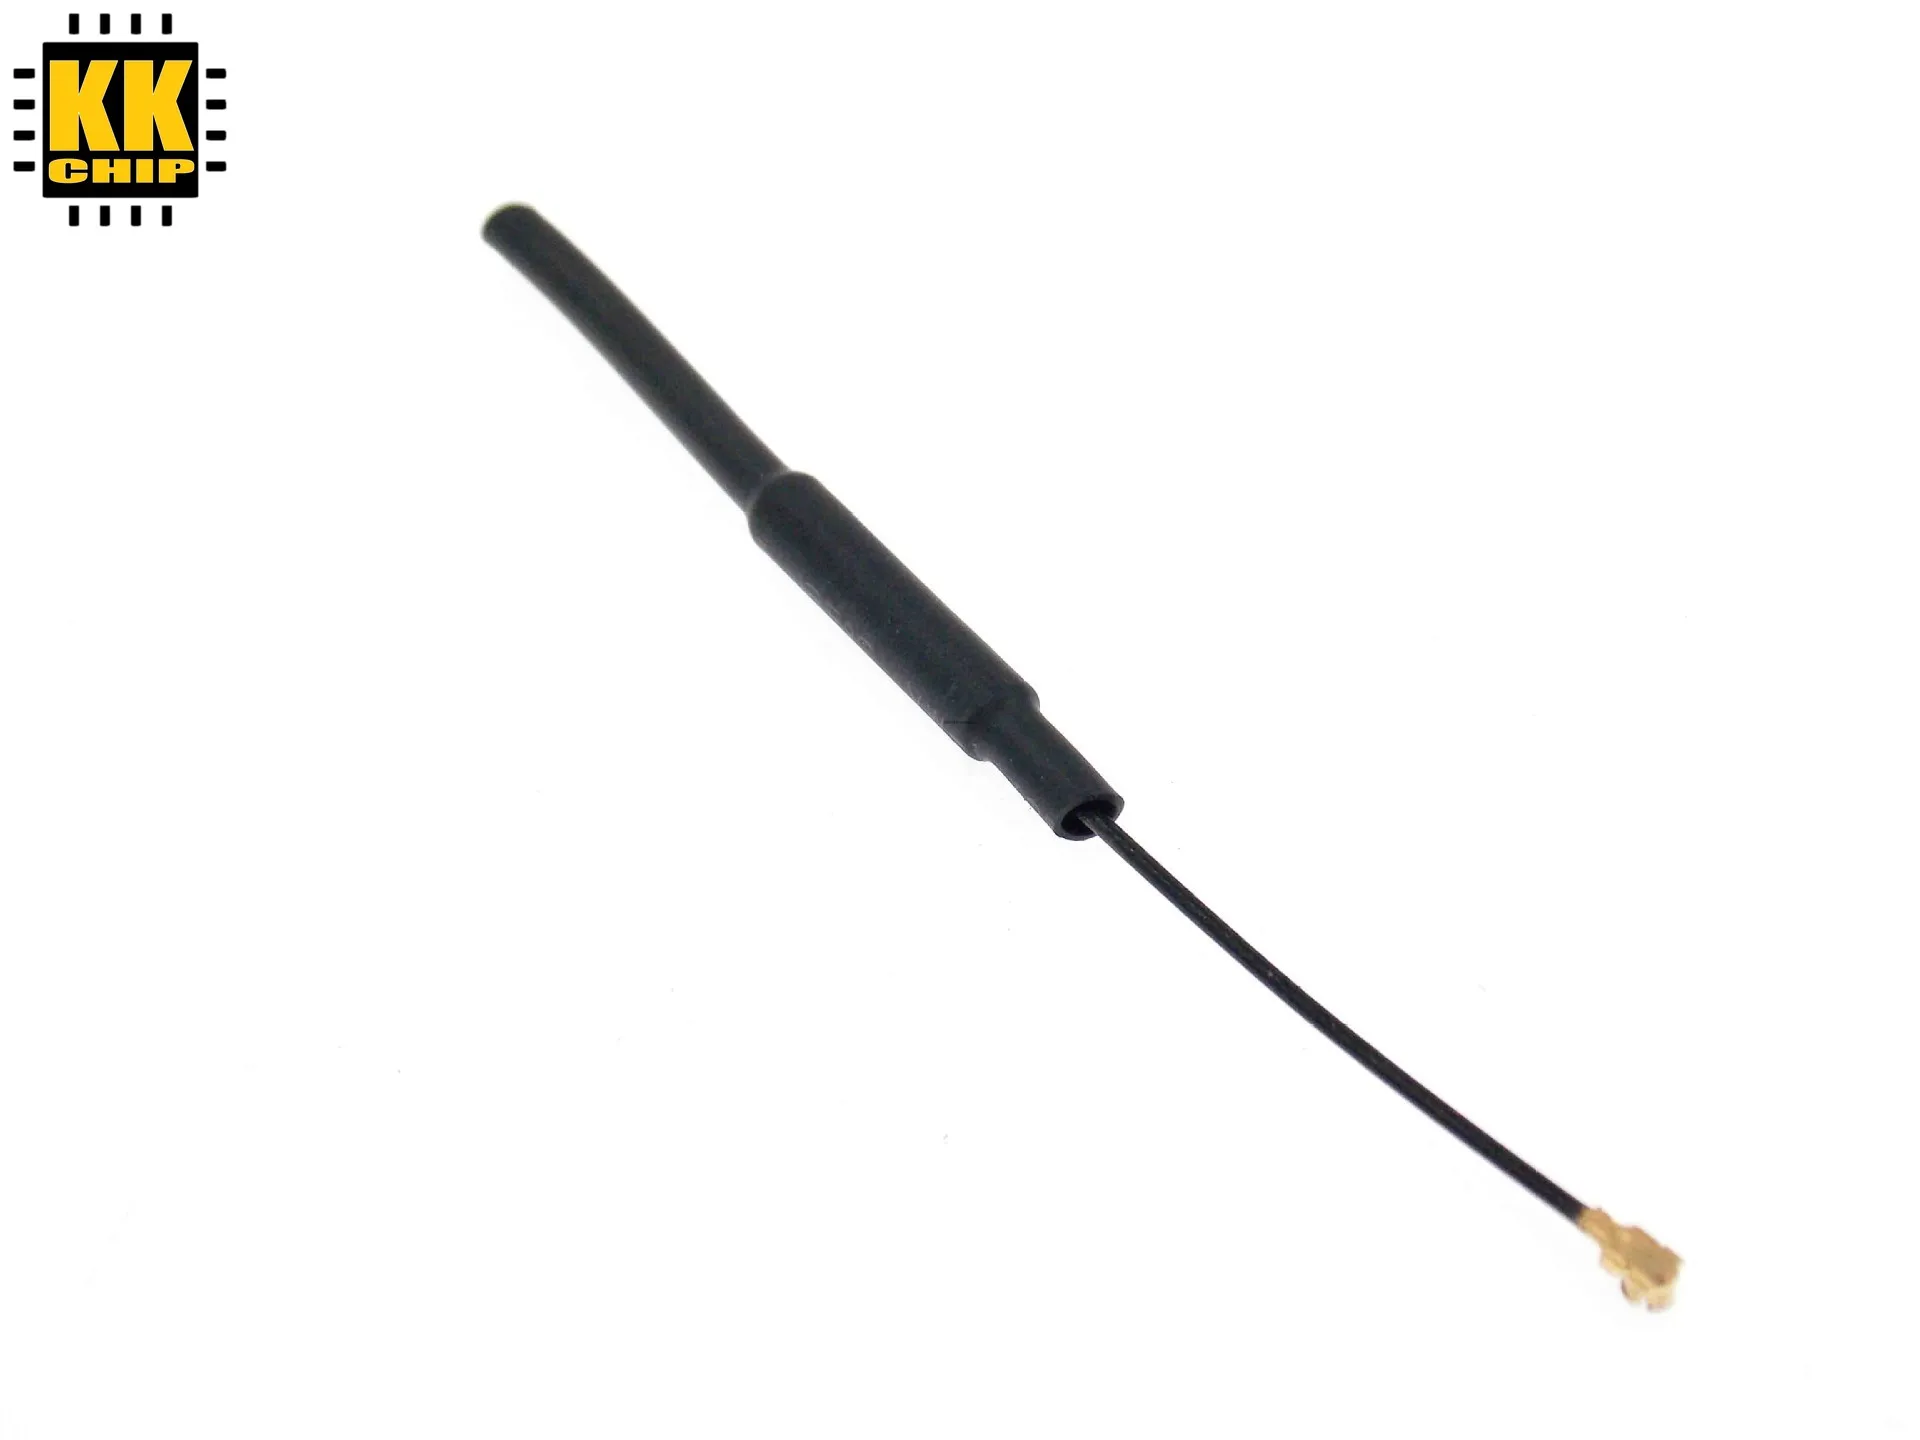 

2.4G Soft Antenna (IPX IPEX connector) WIFI Antenna 2DB Gain Copper With insulating sheath